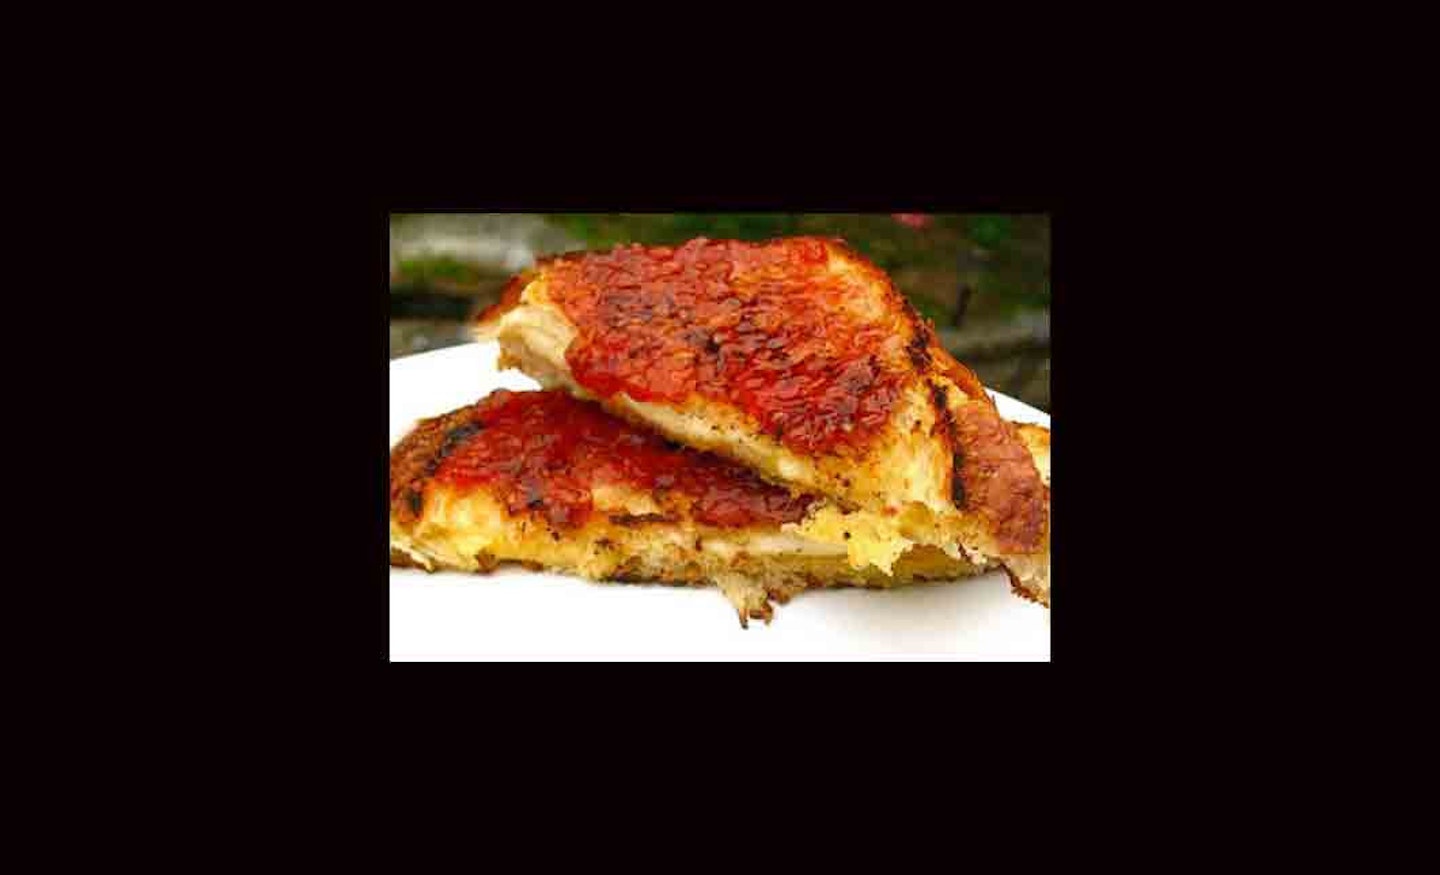 14. Grilled Cheese + Jam